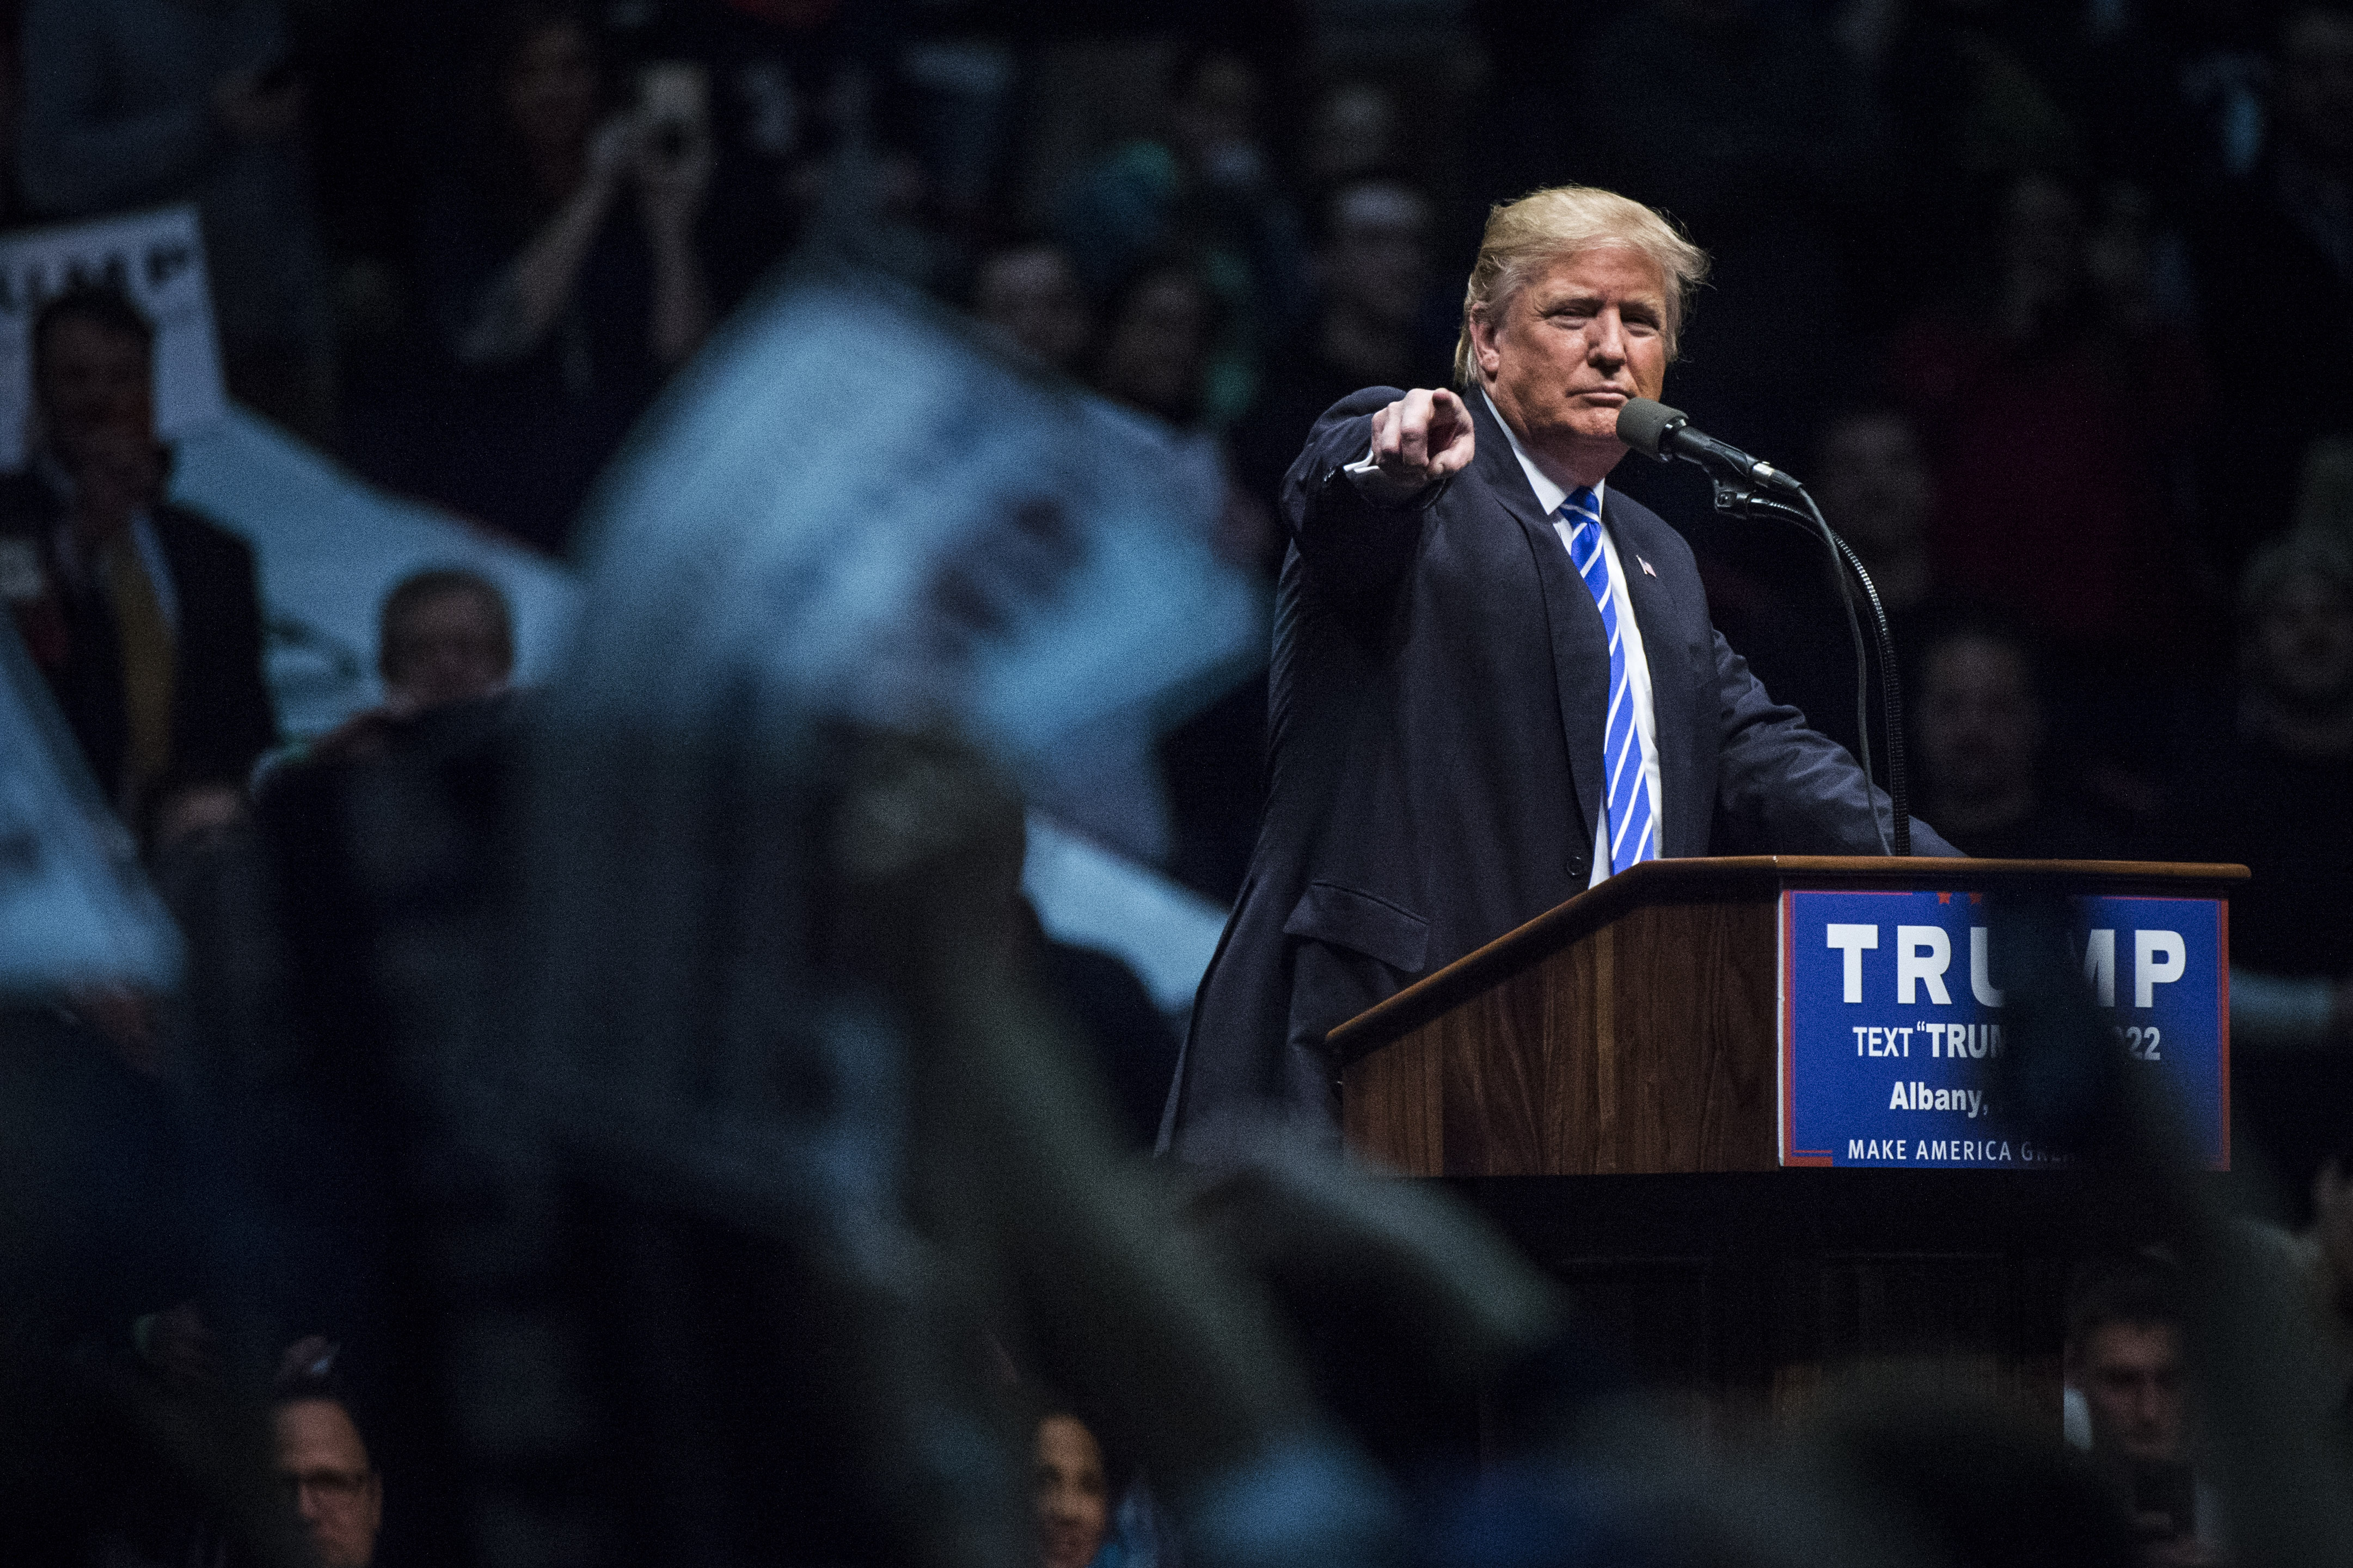 Republican presidential candidate Donald Trump points to a protestor as he speaks during a campaign event at the Times Union Center in Albany, N.Y. on April 11. (Jabin Botsford—The Washington Post/Getty Images)